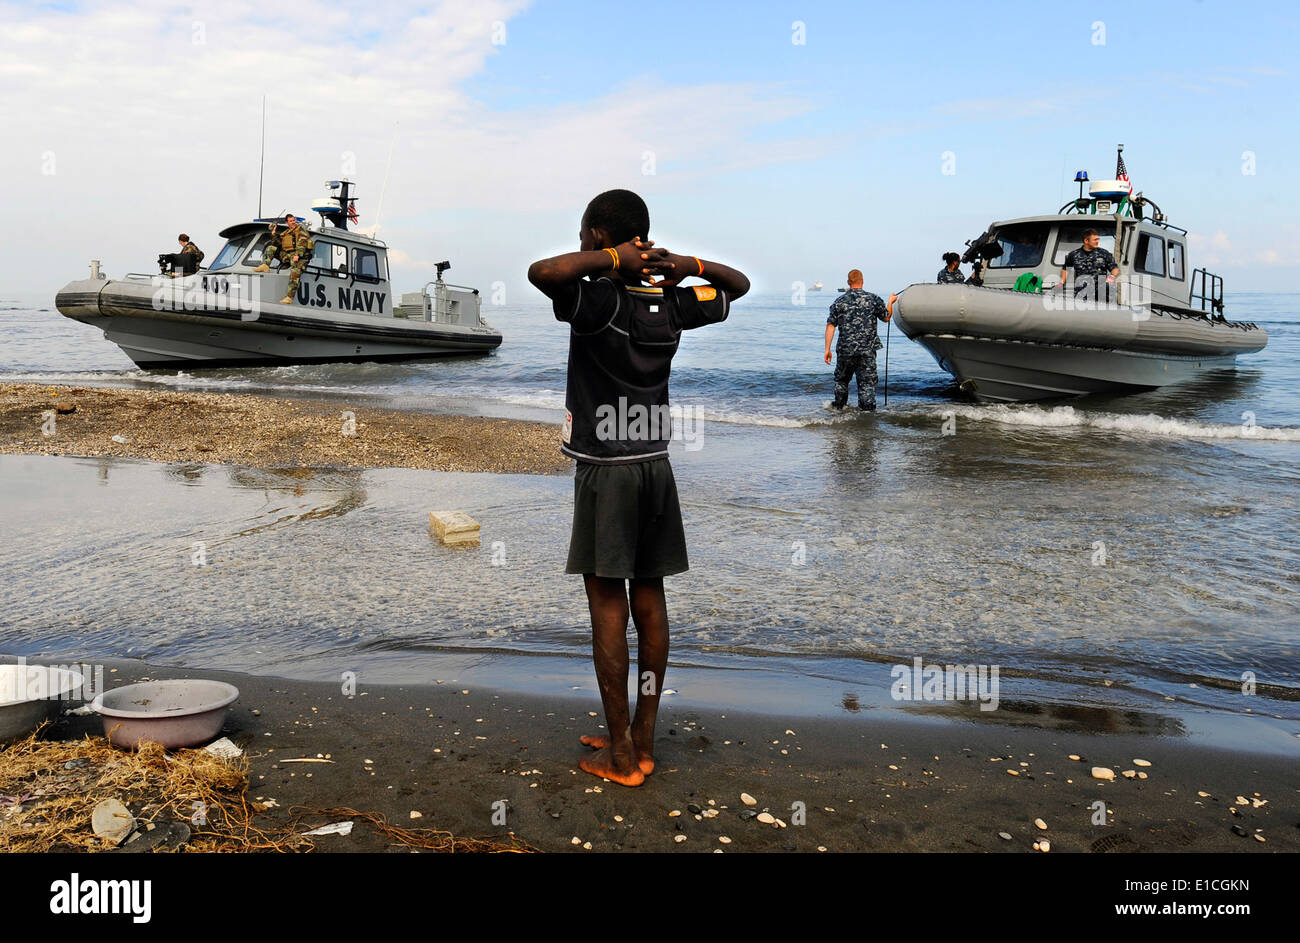 A Haitian boy watches as U.S. Sailors in rigid-hull inflatable boats from the amphibious dock landing ships USS Fort McHenry (L Stock Photo